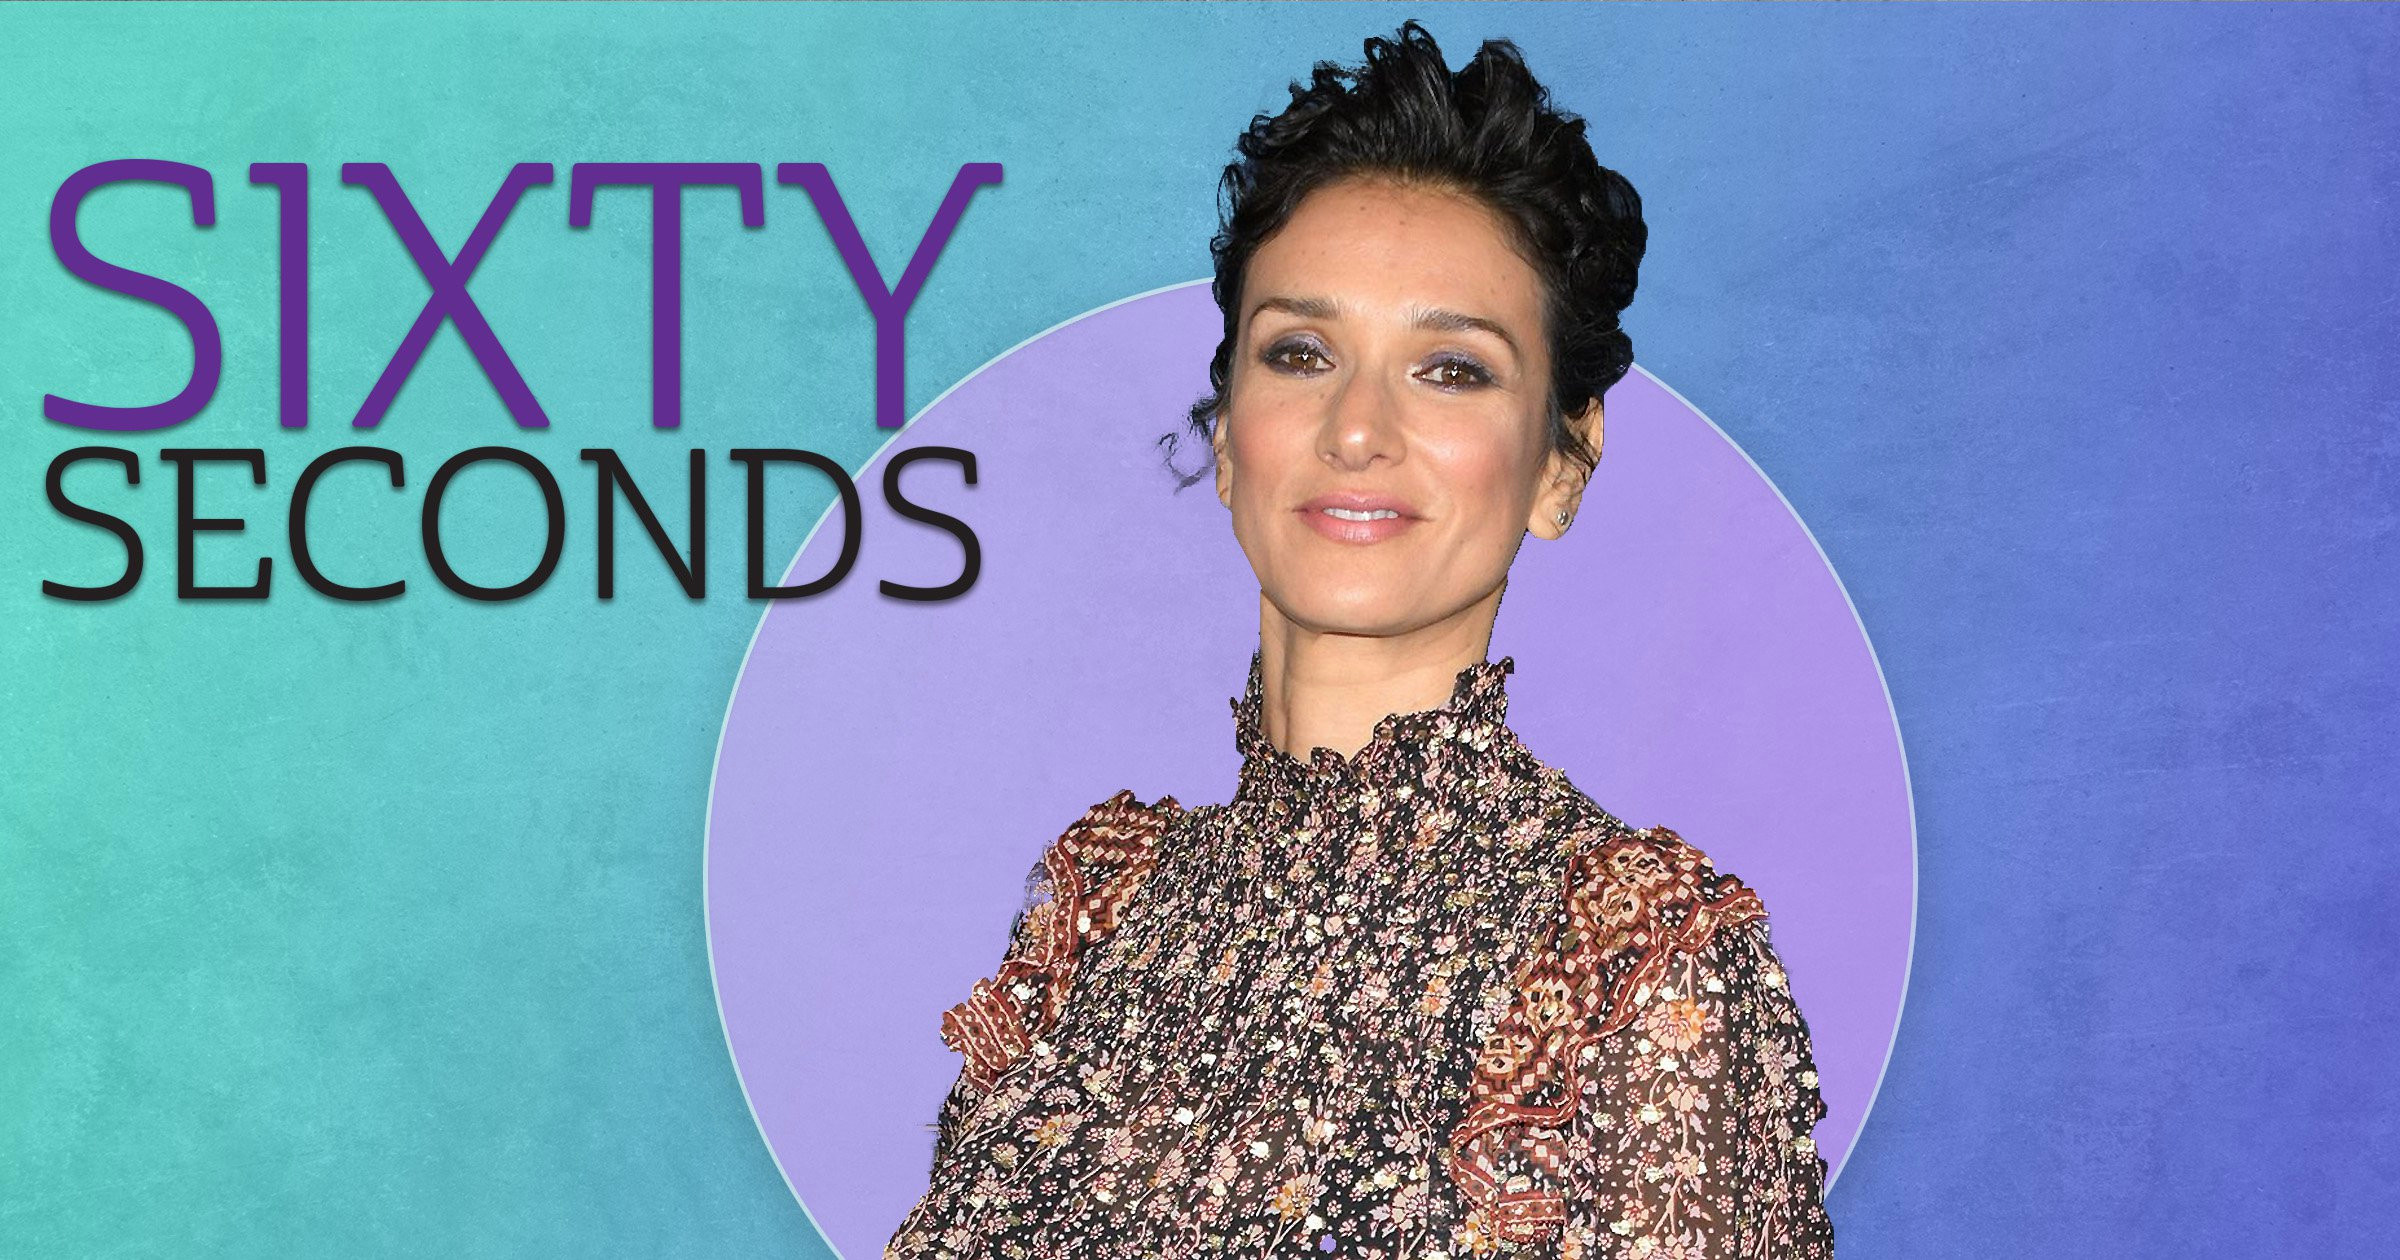 Game Of Thrones’ Indira Varma doesn’t know anything about Star Wars as she prepares for Obi-Wan Kenobi